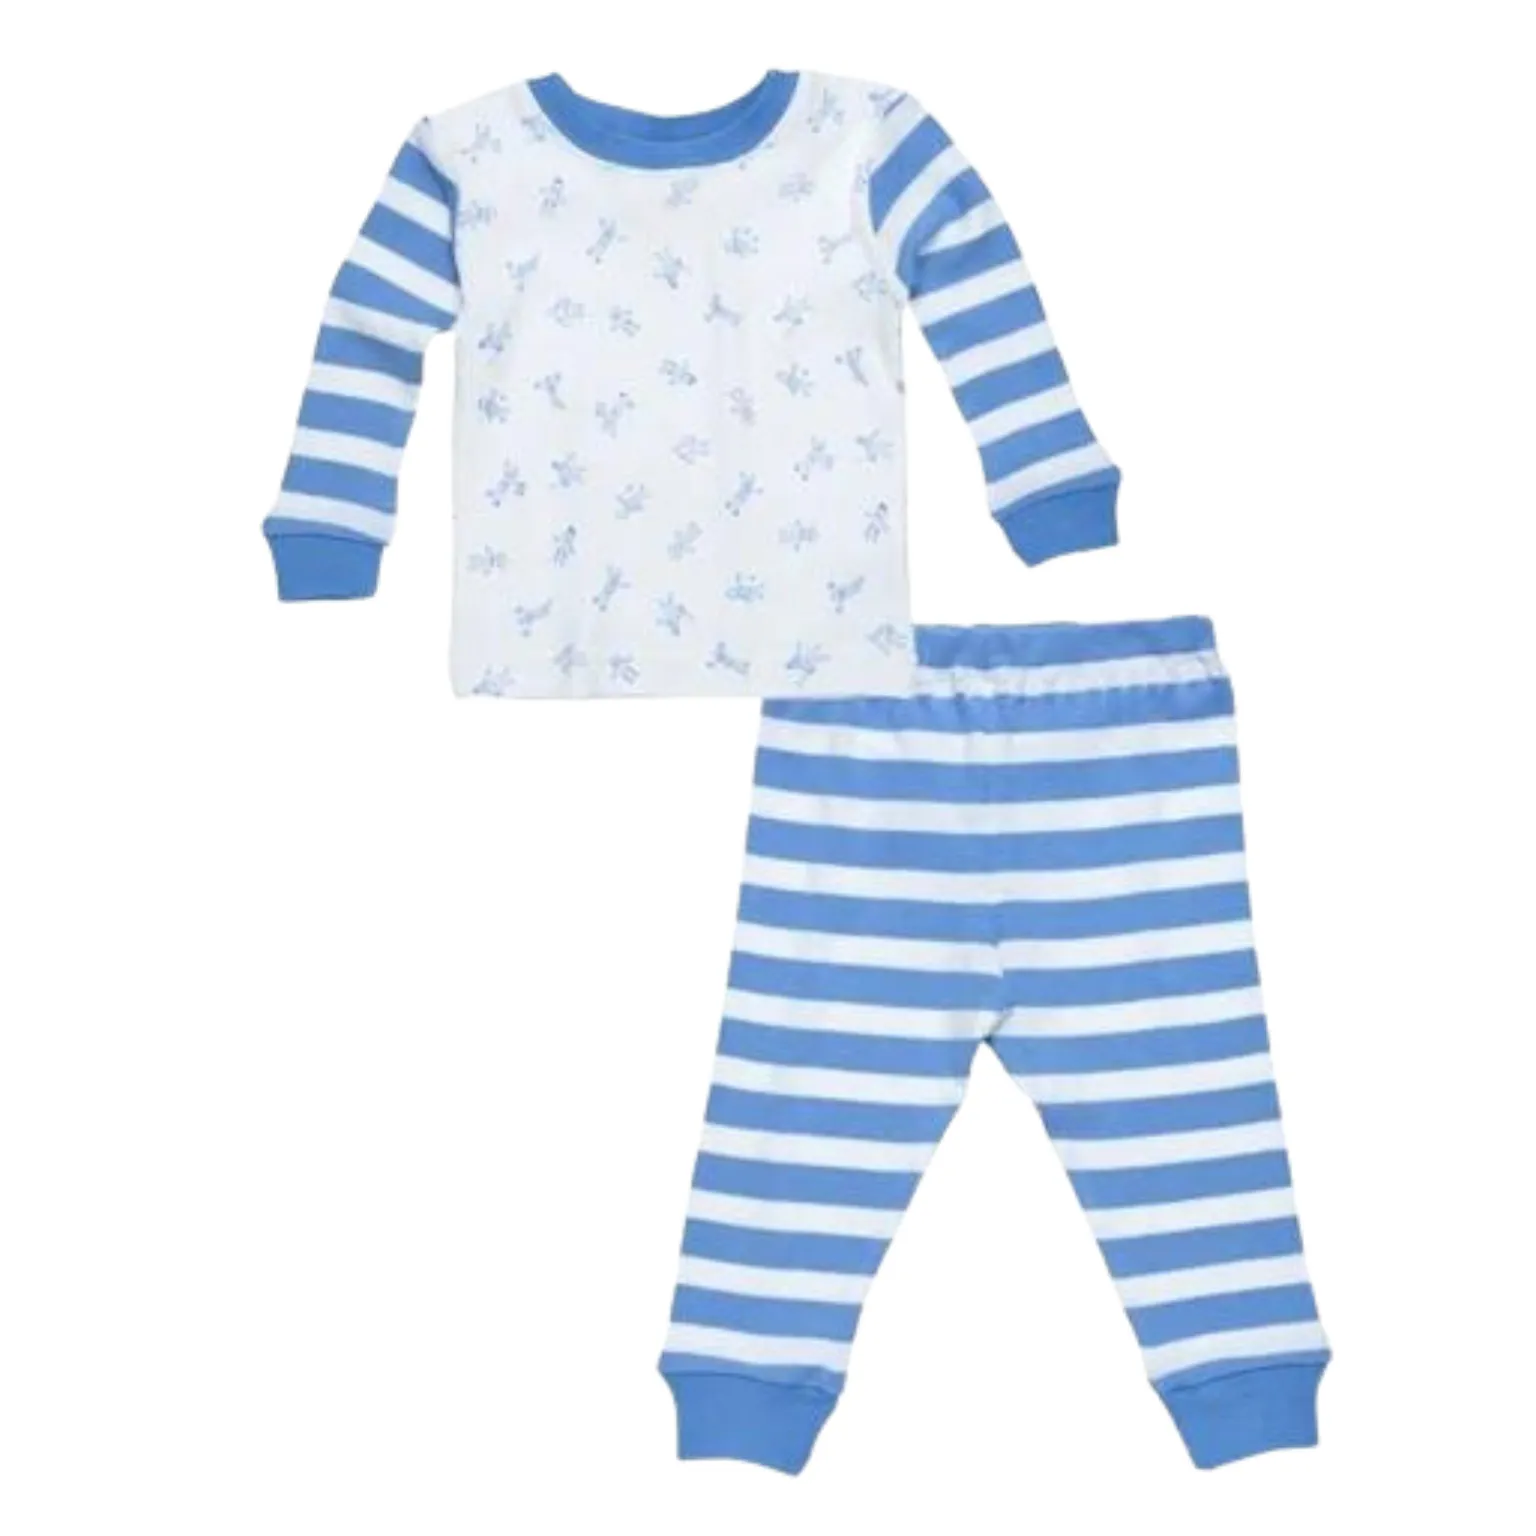 Striped Pajama manufacturing with superior quality